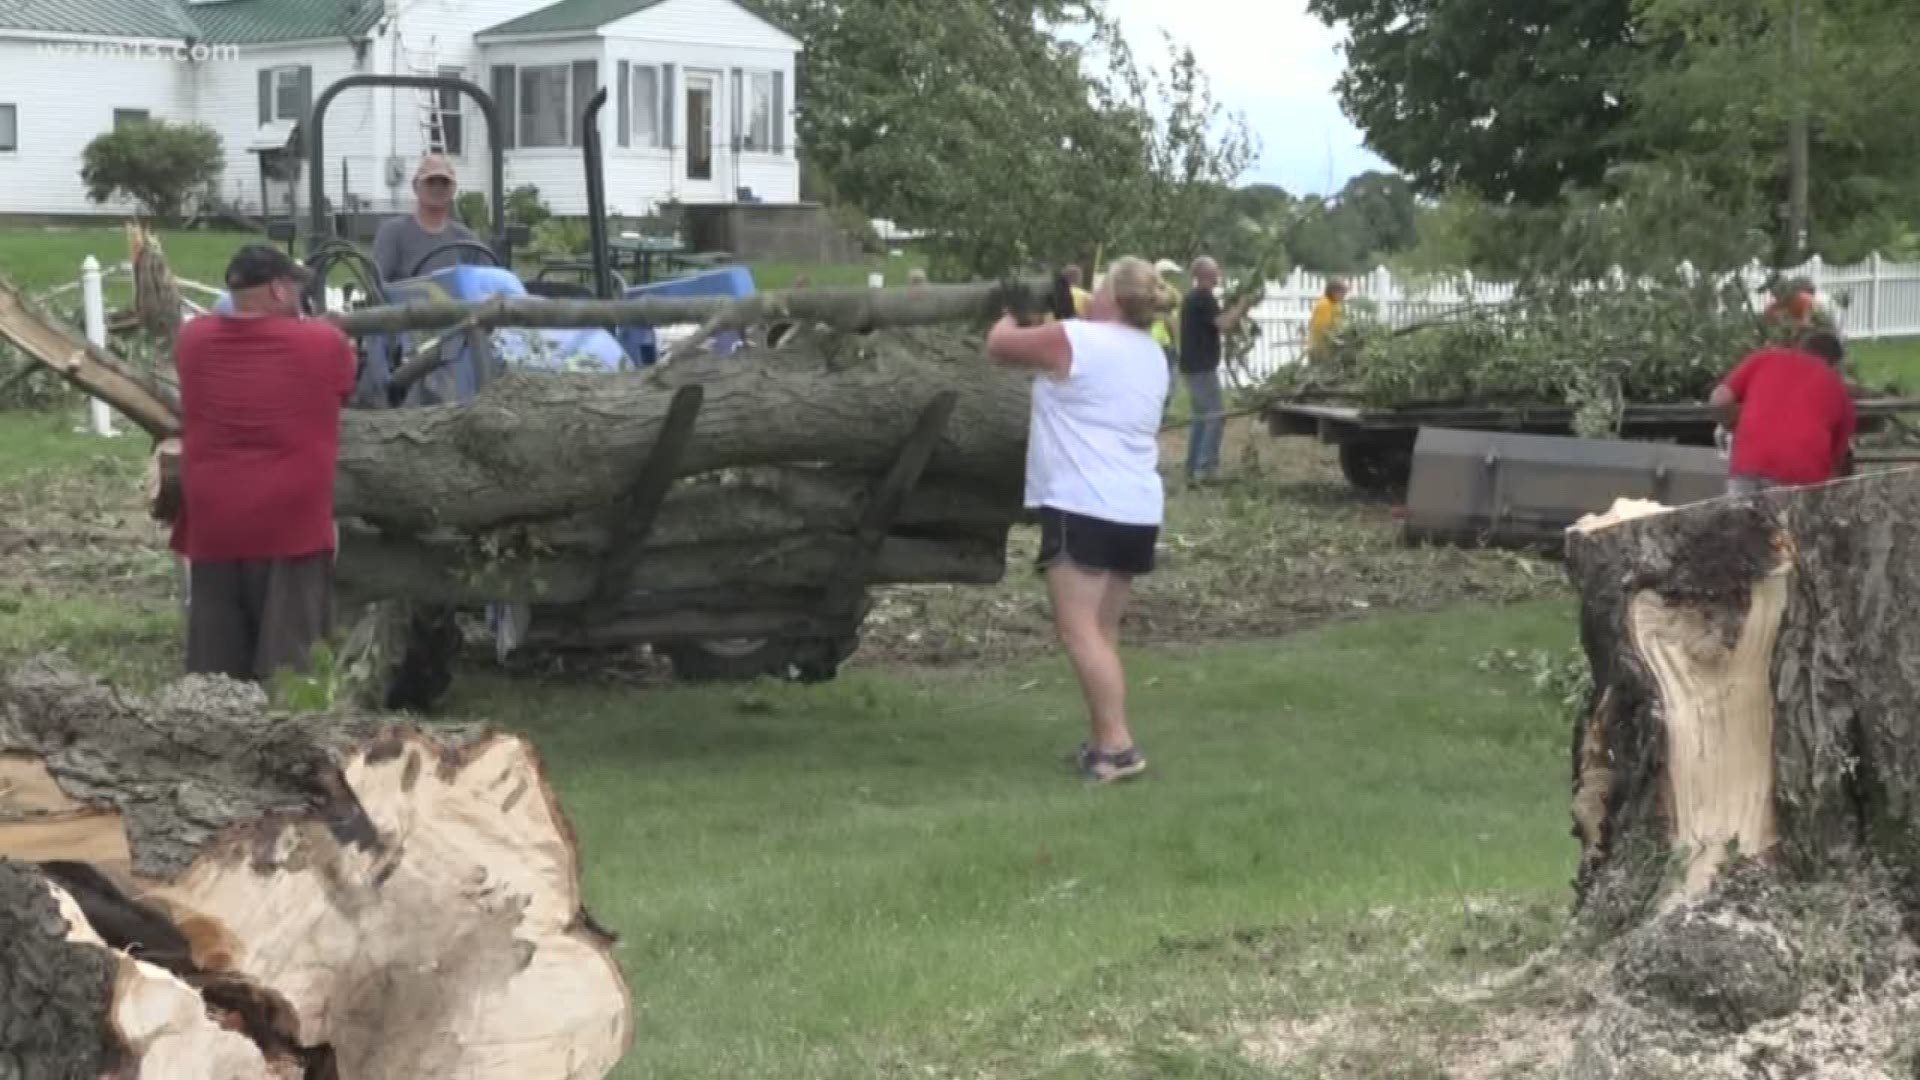 Tornado caused damage in Mecosta County